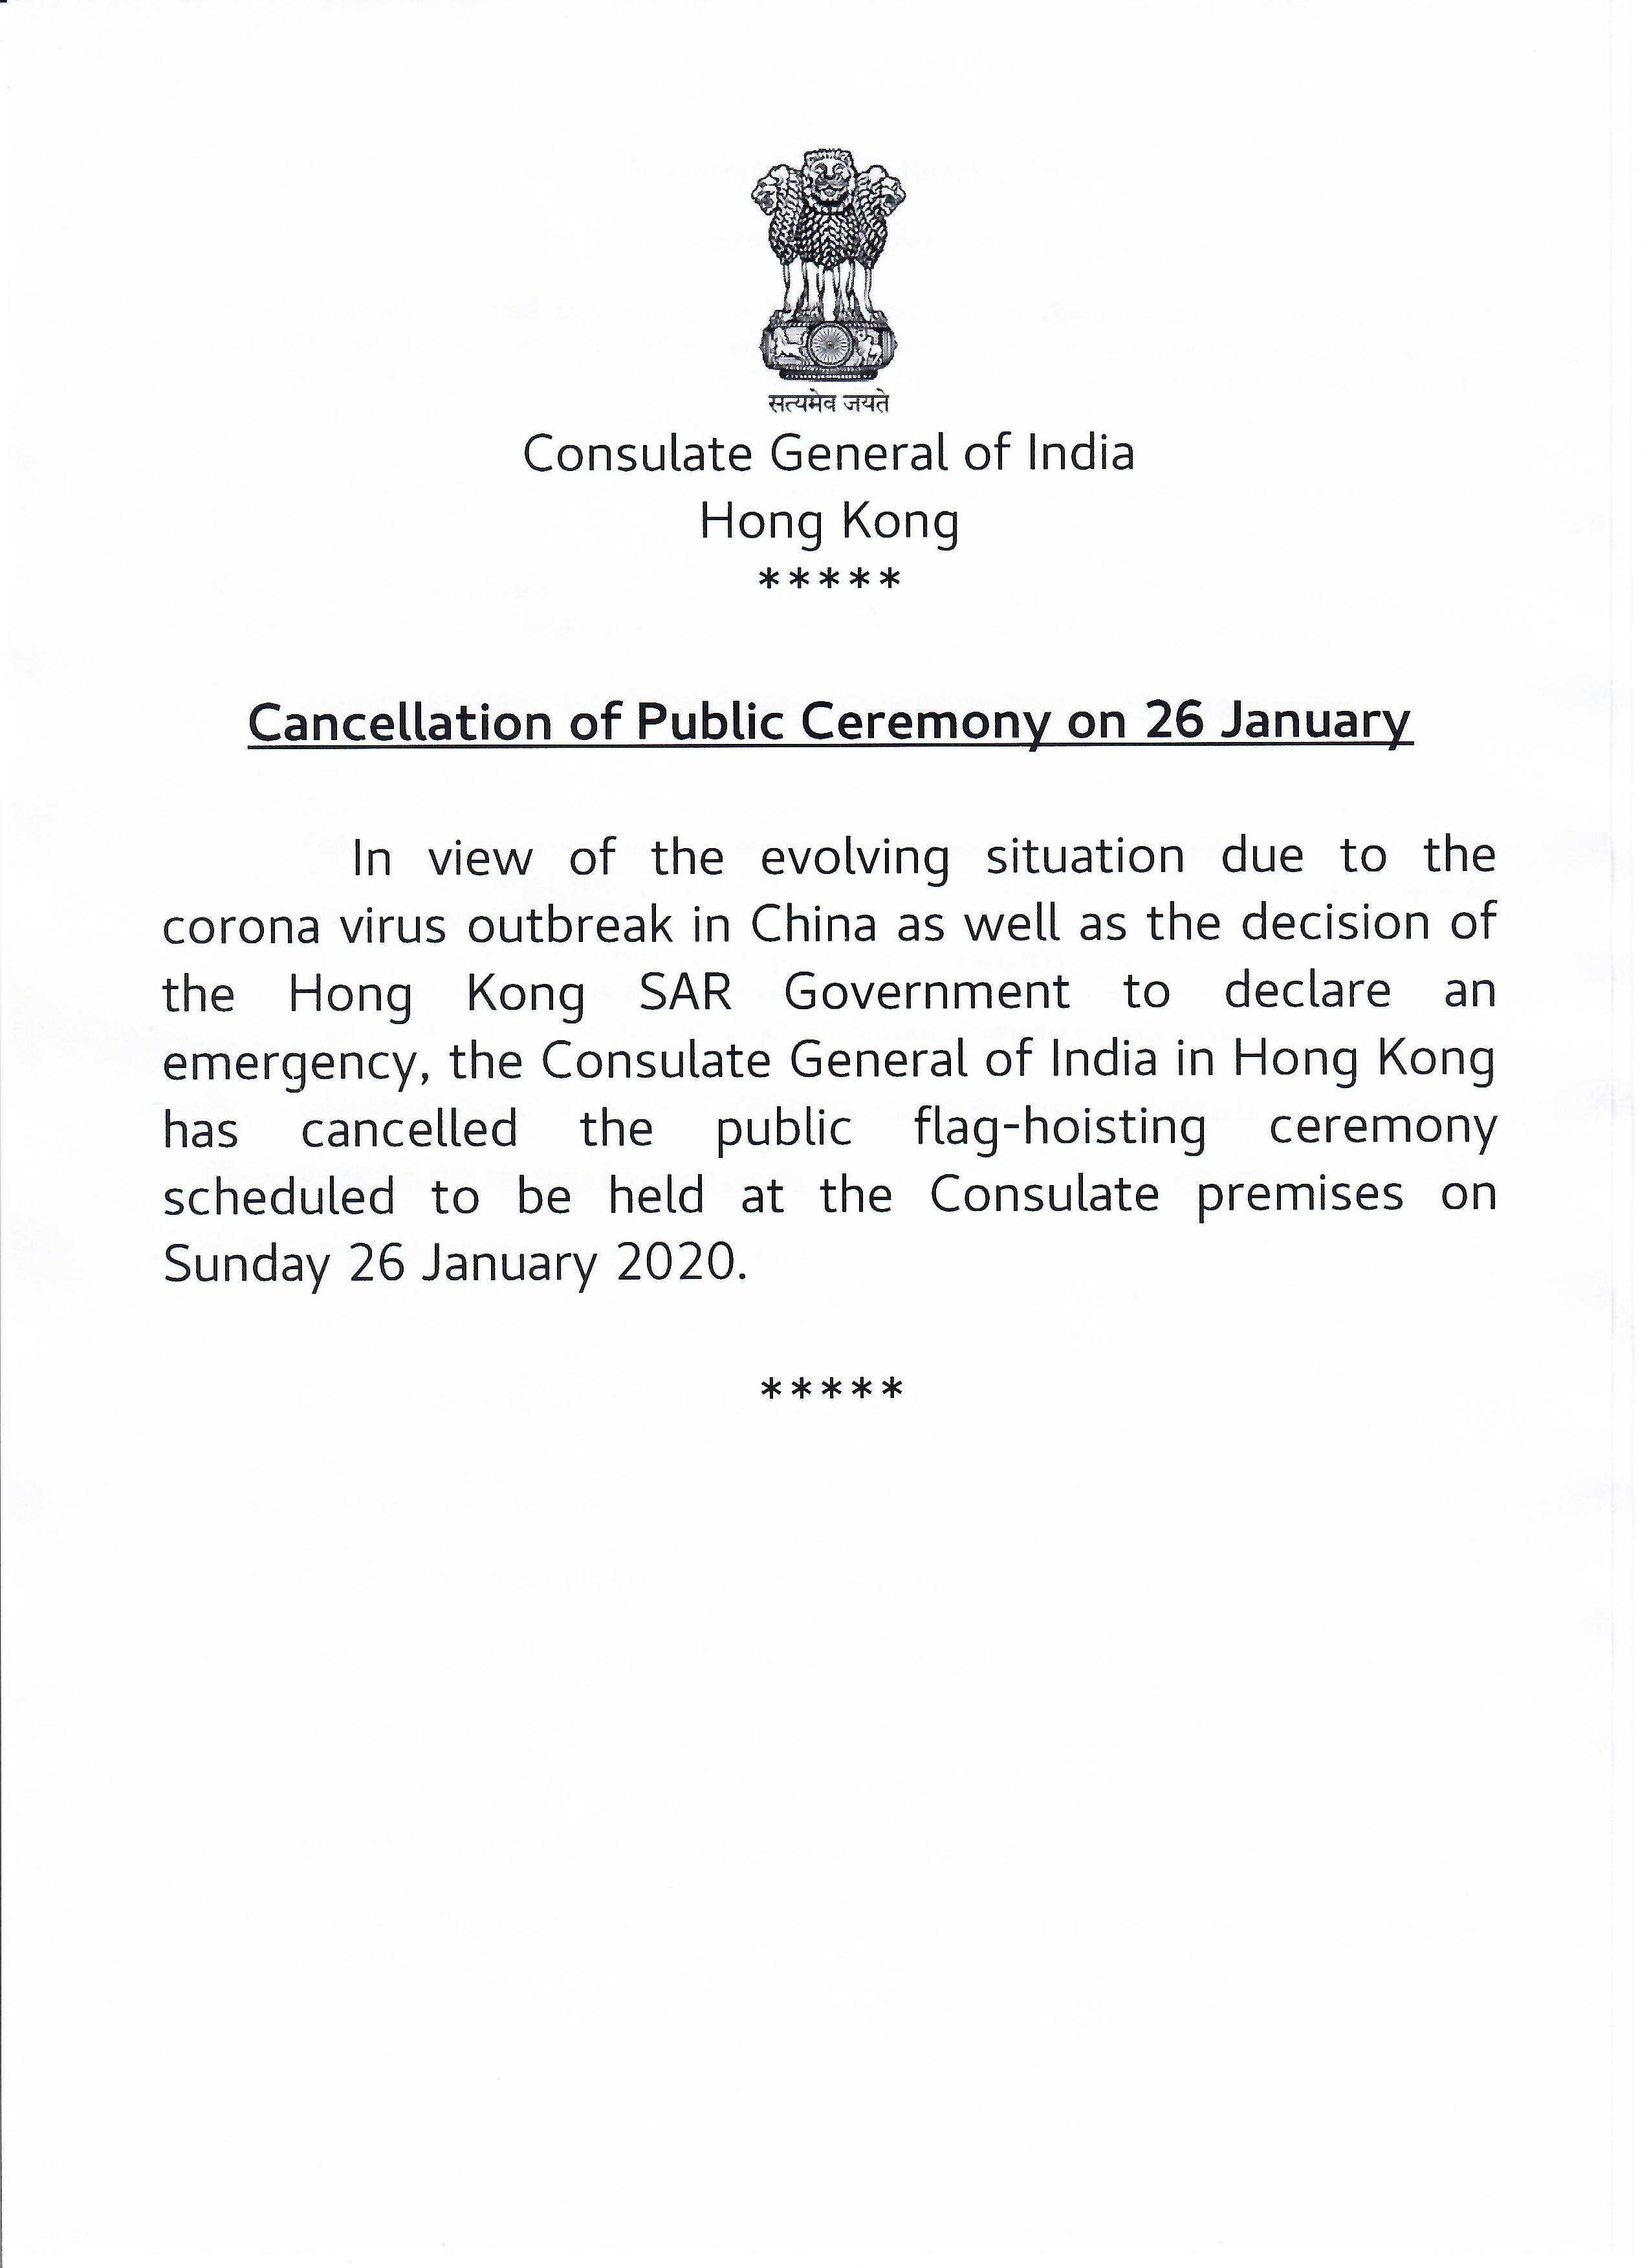 Cancellation of Public Ceremony on 26 January